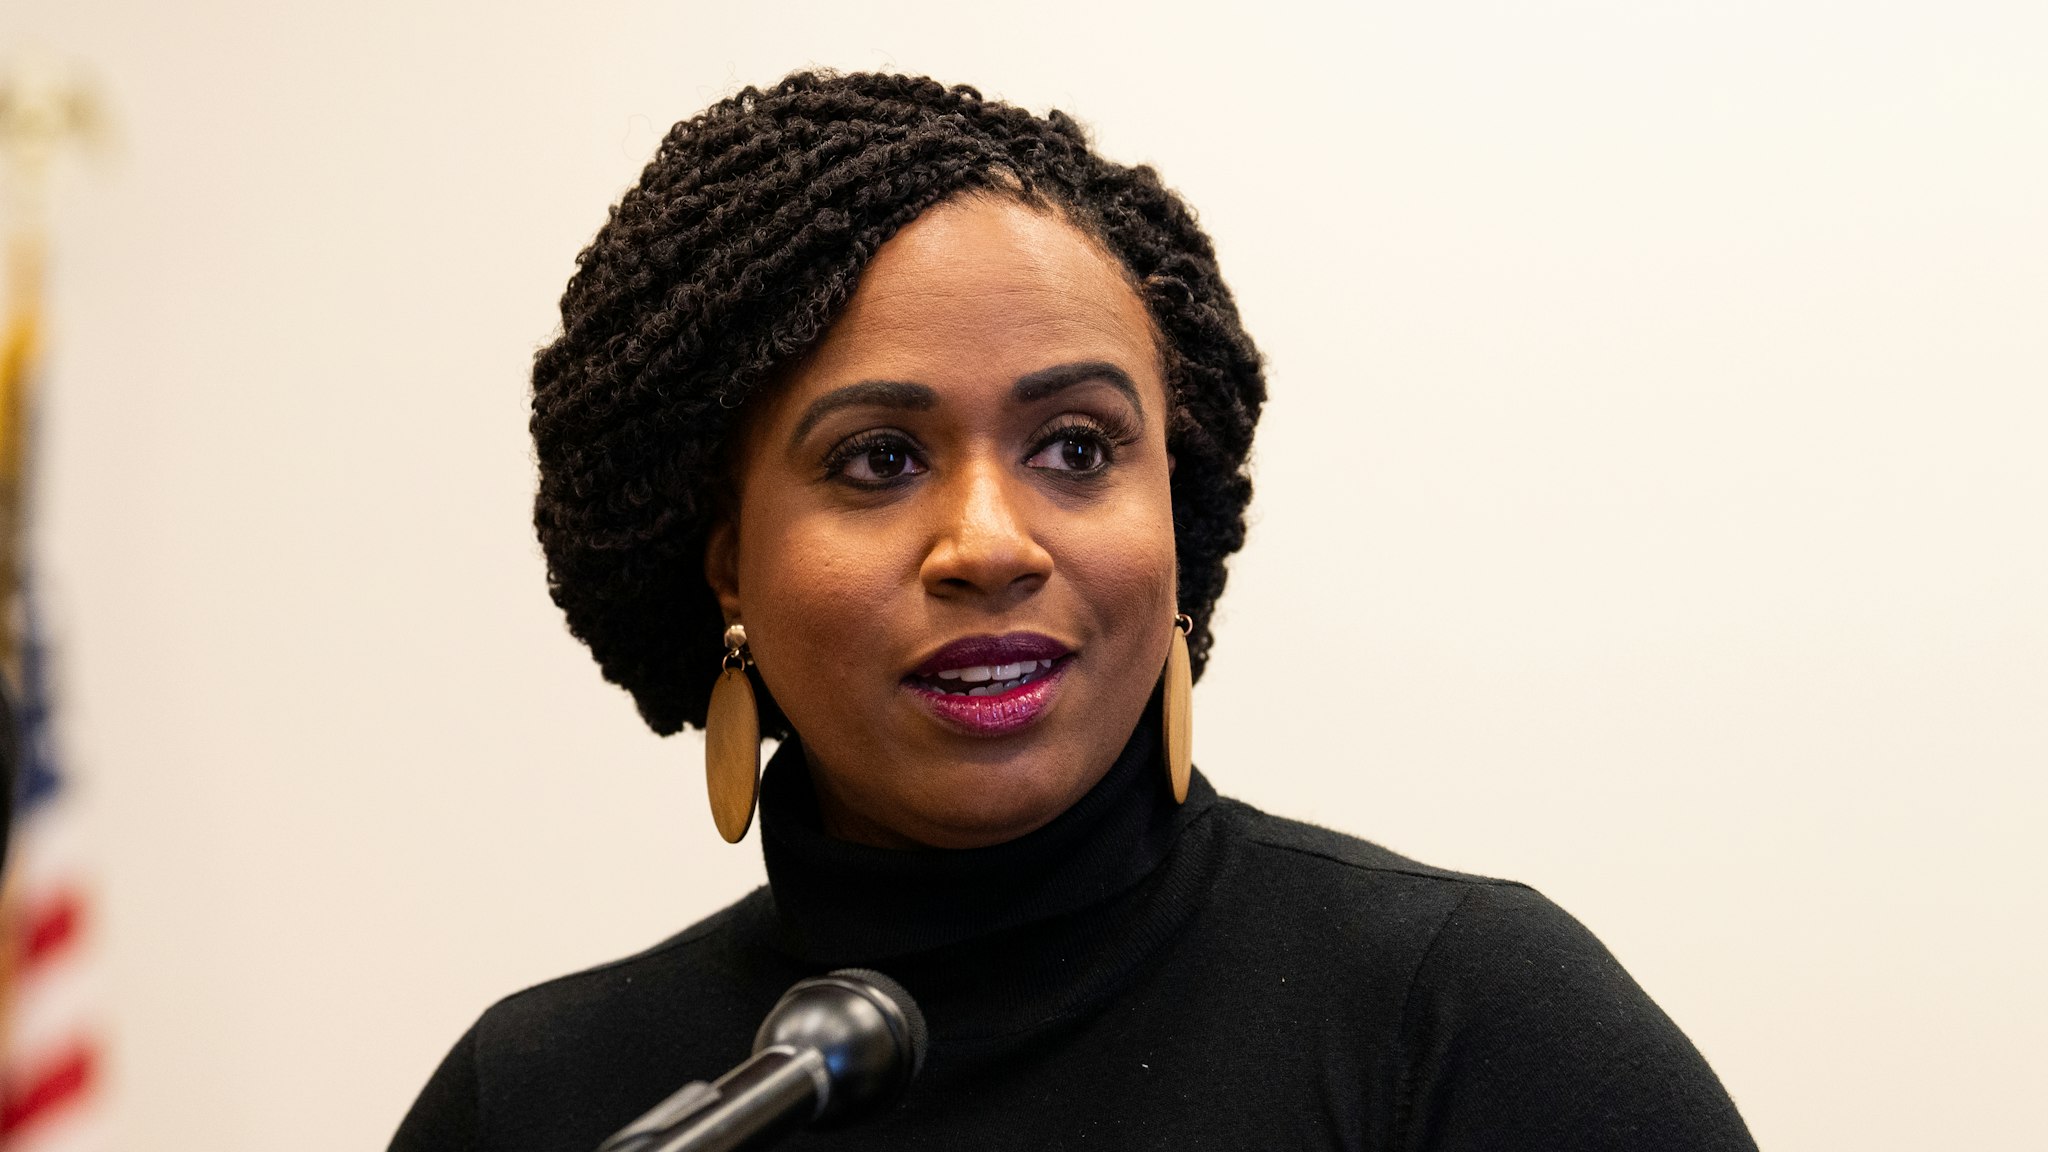 WASHINGTON, DC, UNITED STATES, DECEMBER 5, 2019: U.S. Representative Ayanna Pressley (D-MA) speaks at a press conference to introduce legislation to end school pushout in Washington.-